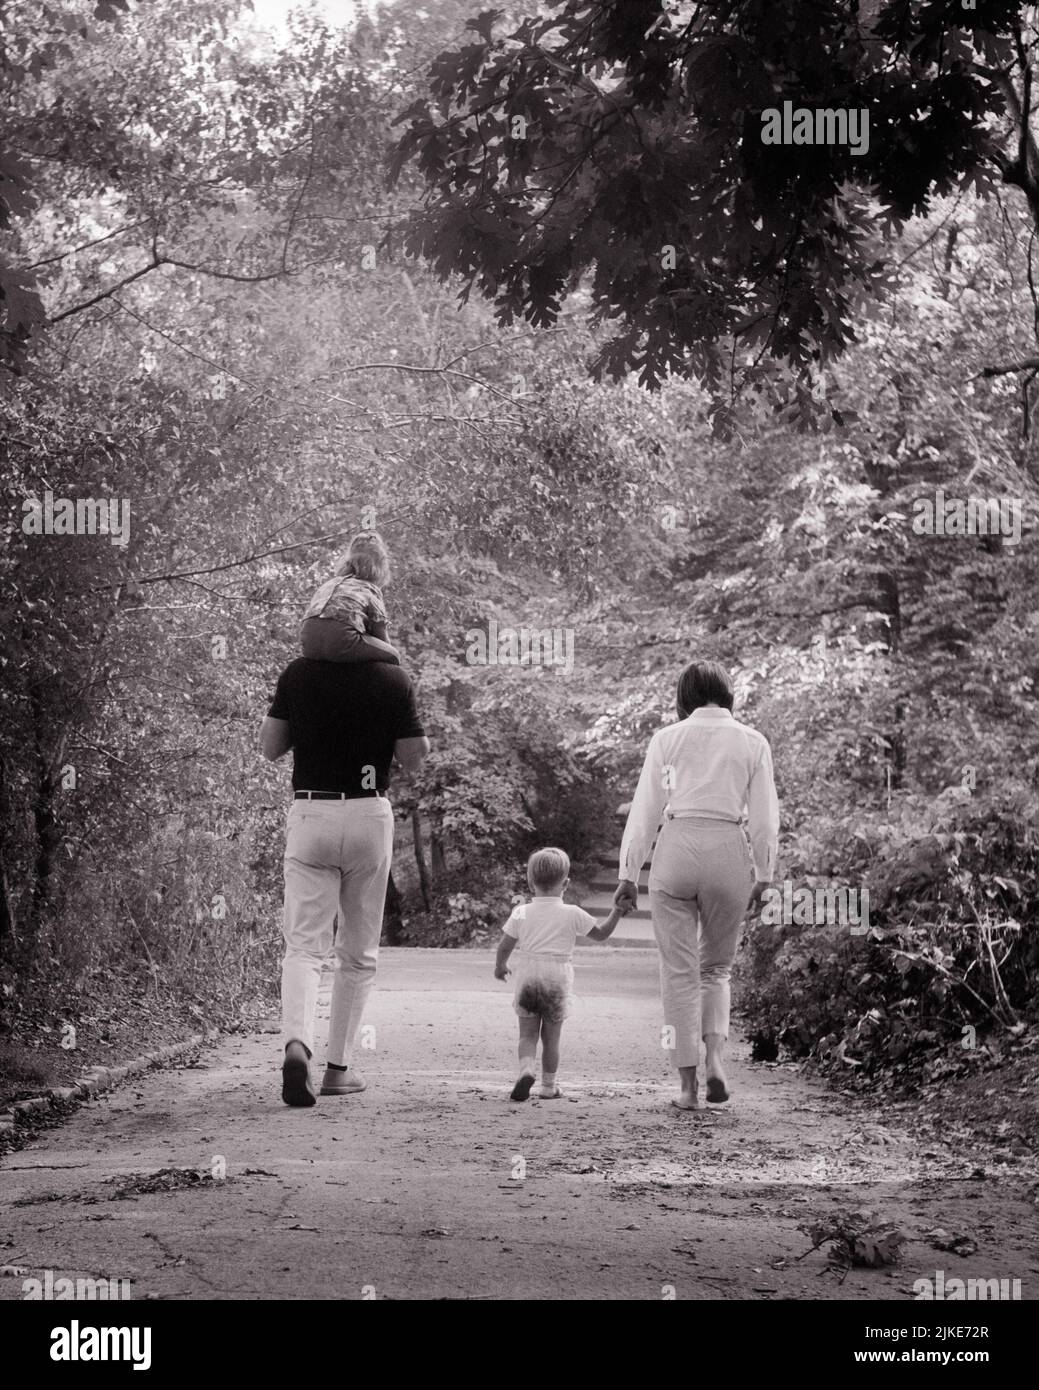 1960s BACK VIEW OF FAMILY WALKING ON WOODLAND PARK PATH FATHER CARRYING DAUGHTER PIGGYBACK AND MOTHER HOLDING TODDLER SON’S HAND - j13212 HAR001 HARS DAD FOUR EXERCISING MOM NOSTALGIC ACTIVE PAIR 4 SUBURBAN MOTHERS OLD TIME NOSTALGIA BROTHER OLD FASHION SISTER 1 FITNESS JUVENILE HEALTHY PEACE SONS FAMILIES LIFESTYLE SATISFACTION FEMALES MARRIED BROTHERS RURAL SPOUSE HUSBANDS HEALTHINESS COPY SPACE FRIENDSHIP FULL-LENGTH LADIES DAUGHTERS PERSONS INSPIRATION MALES SERENITY SIBLINGS SISTERS FATHERS B&W PARTNER ACTIVITY PATH HAPPINESS PHYSICAL LEISURE STRENGTH AND DADS RECREATION REAR VIEW SIBLING Stock Photo